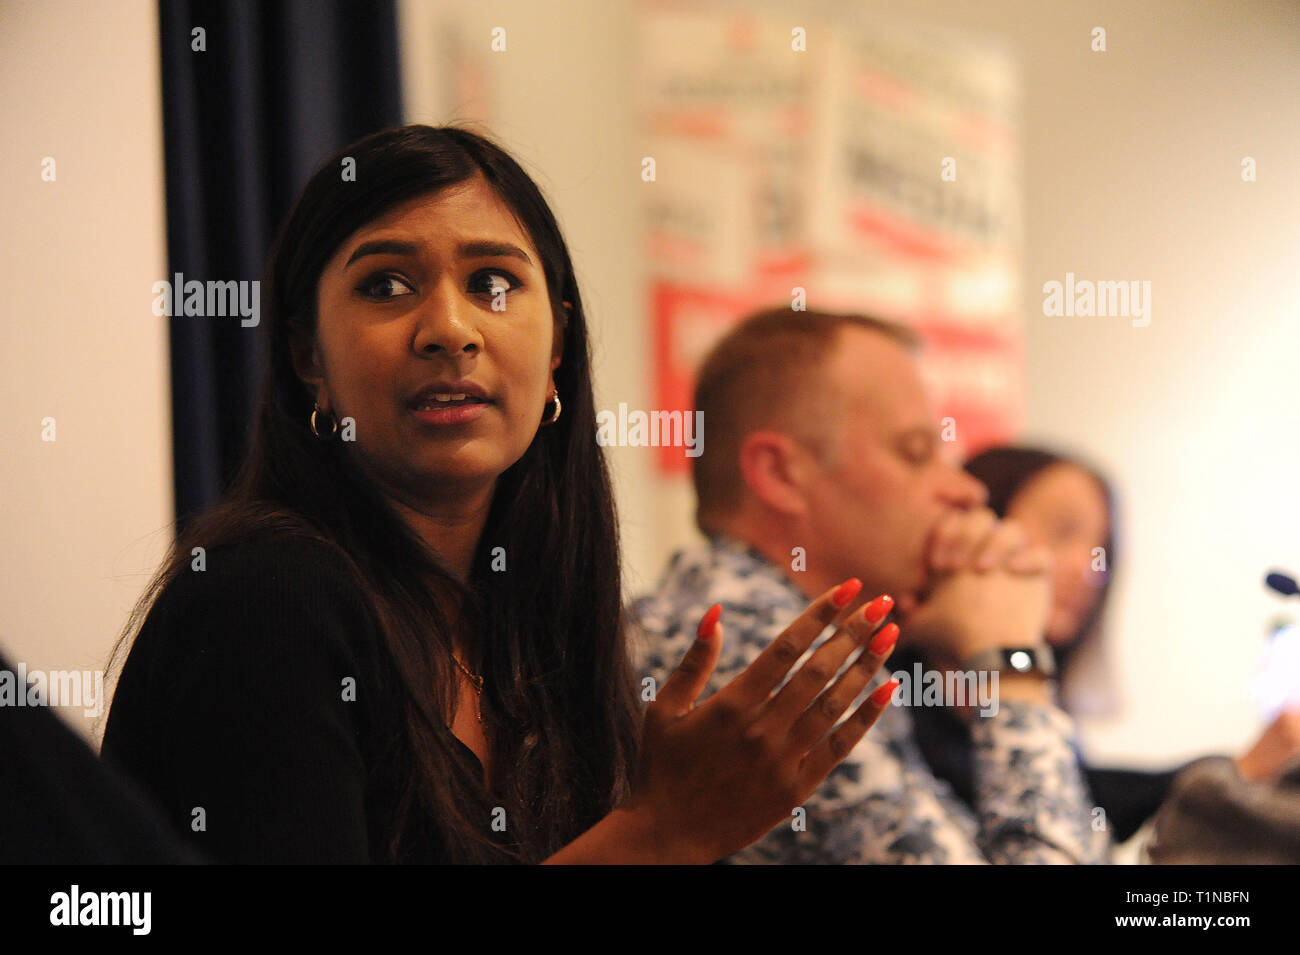 London, England. 16th March, 2019. Ash Sarkar, senior editor at Novara Media, writer, broadcaster, journalist and lecturer, speaking during the sessio Stock Photo